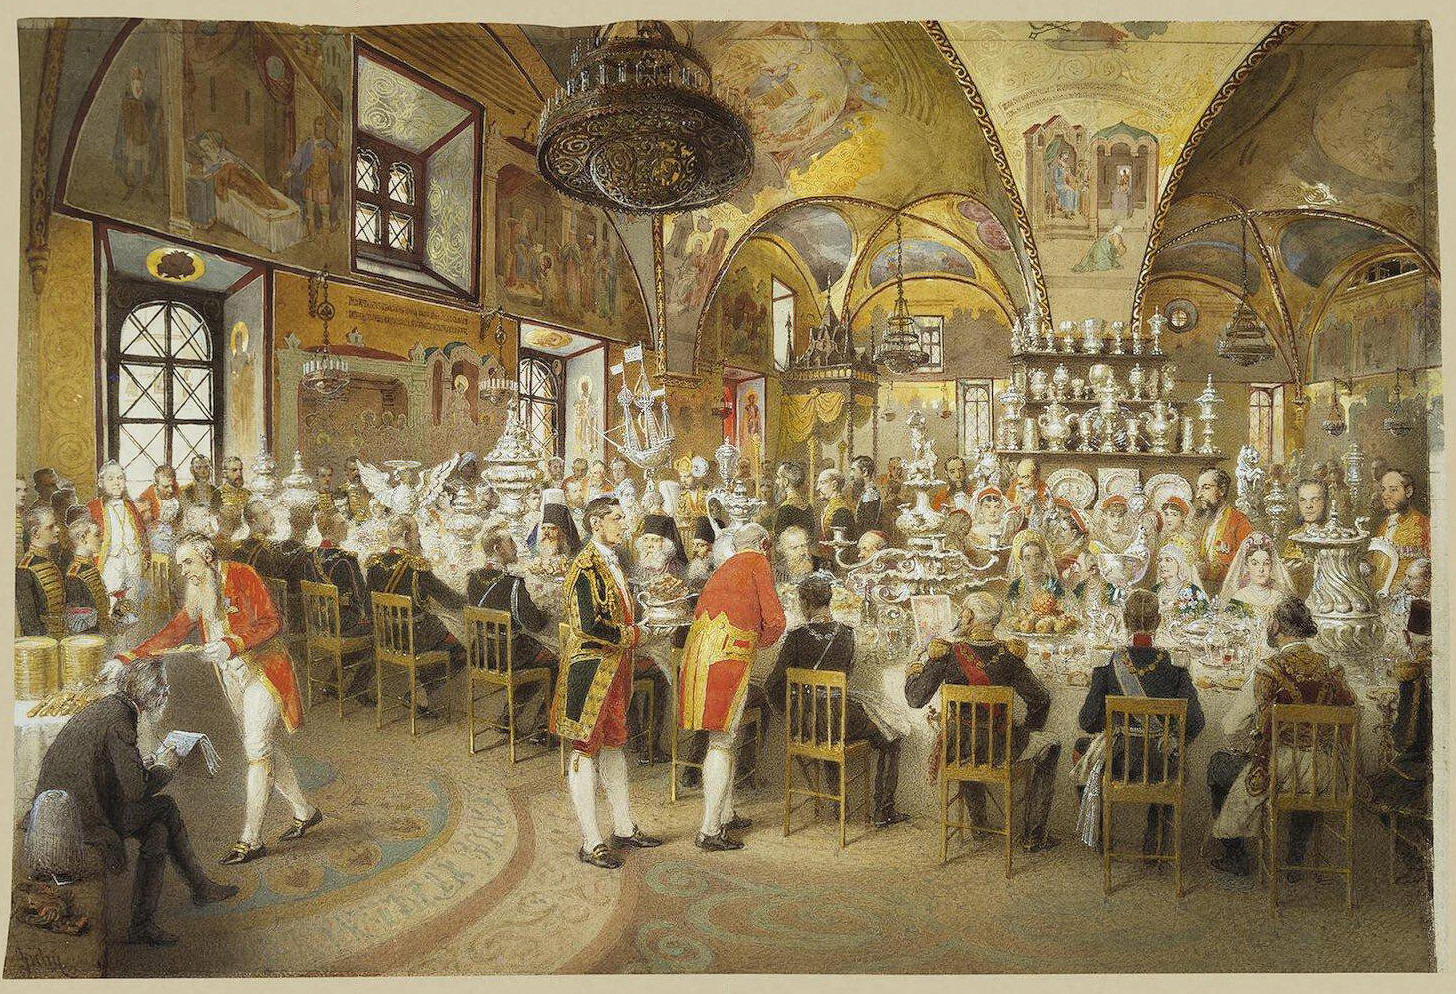 Mihály Zichy. The gala dinner in the Concert hall of the Winter Palace, 1873. 